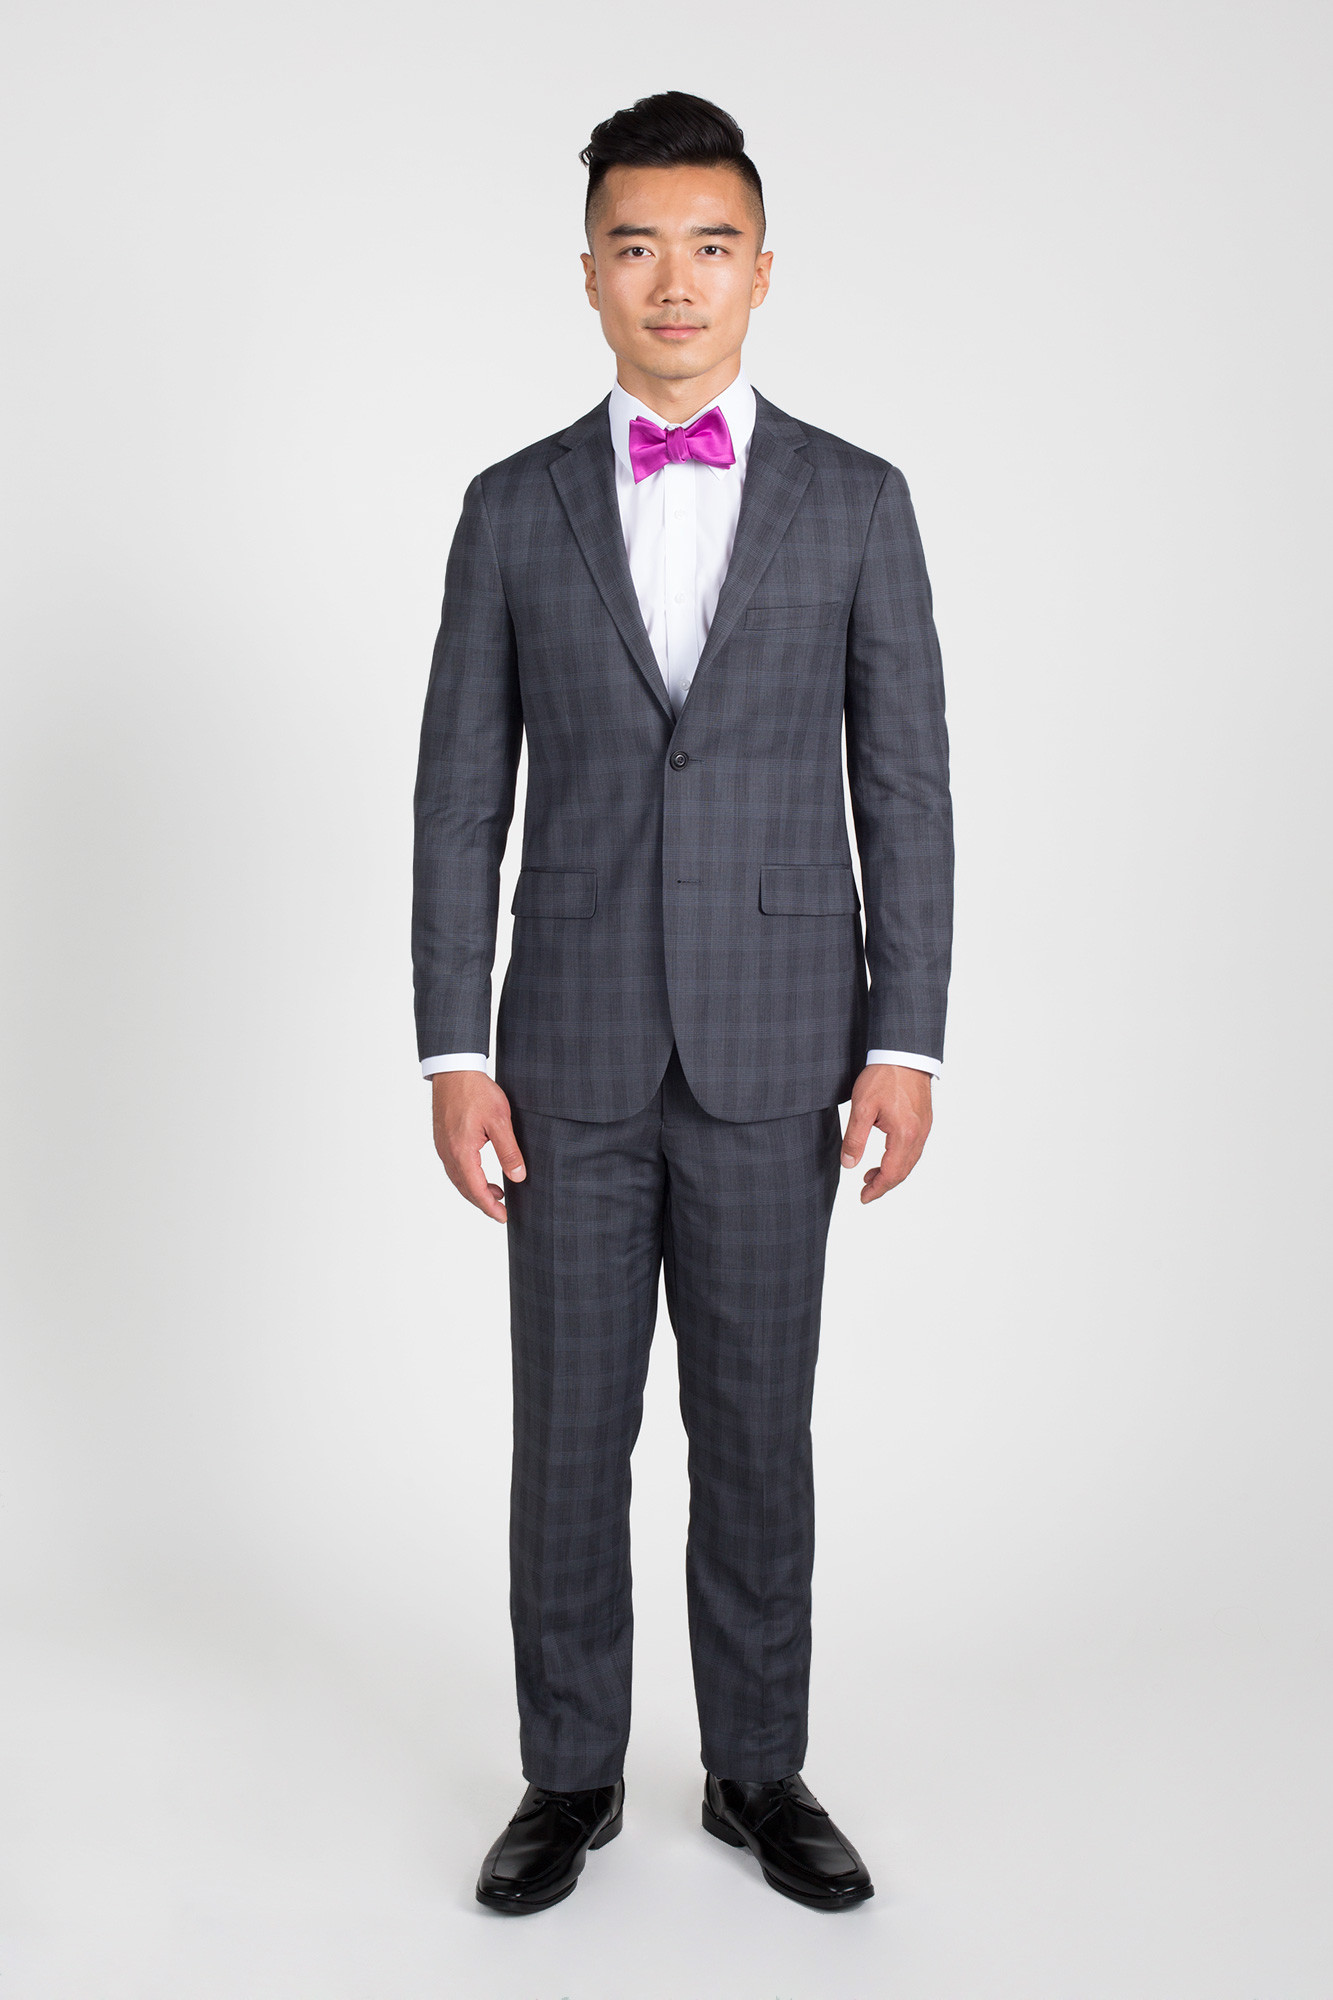 Call if not Text or Whatsup 3104300939 To Setup The Group - Call: 3104300939 Men's 2 Button Charcoal Grey Plaid Slim Fit Groomsmen Suits ~ Groom Wedding Suit  - Color: Dark Grey Suit